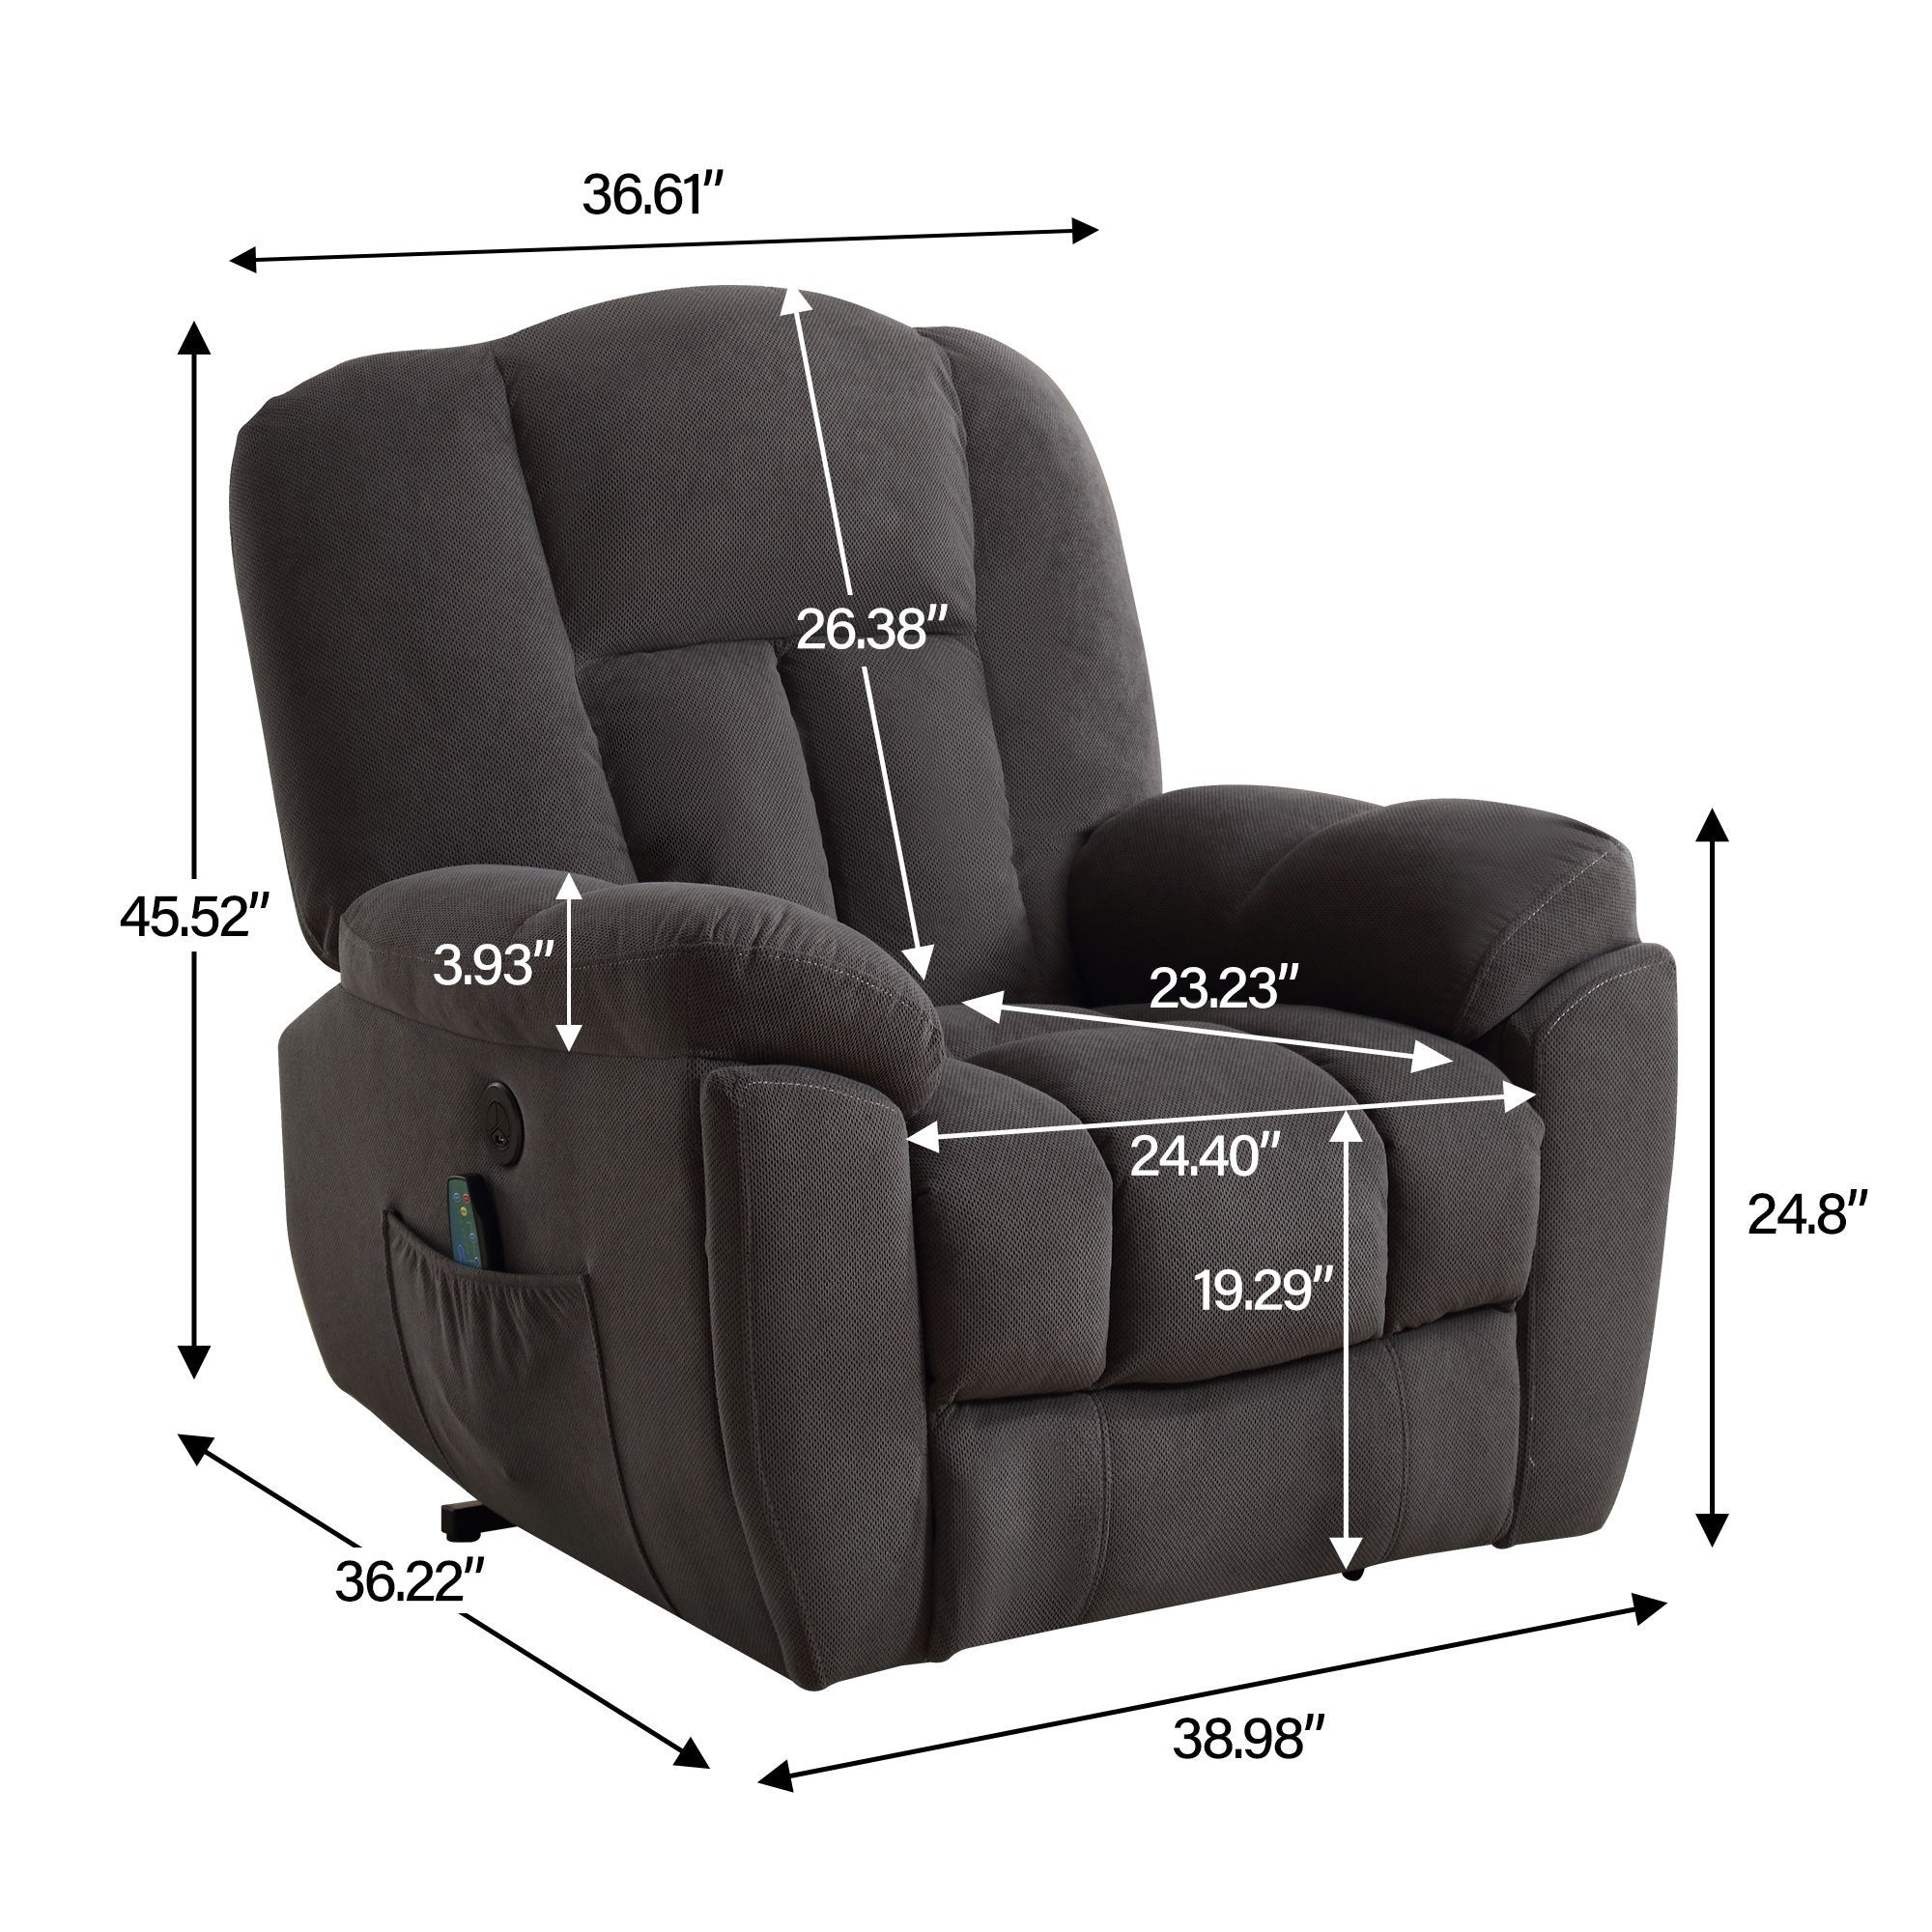 Infinite Position Power Lift Recliner with Heat and Massage, measurements